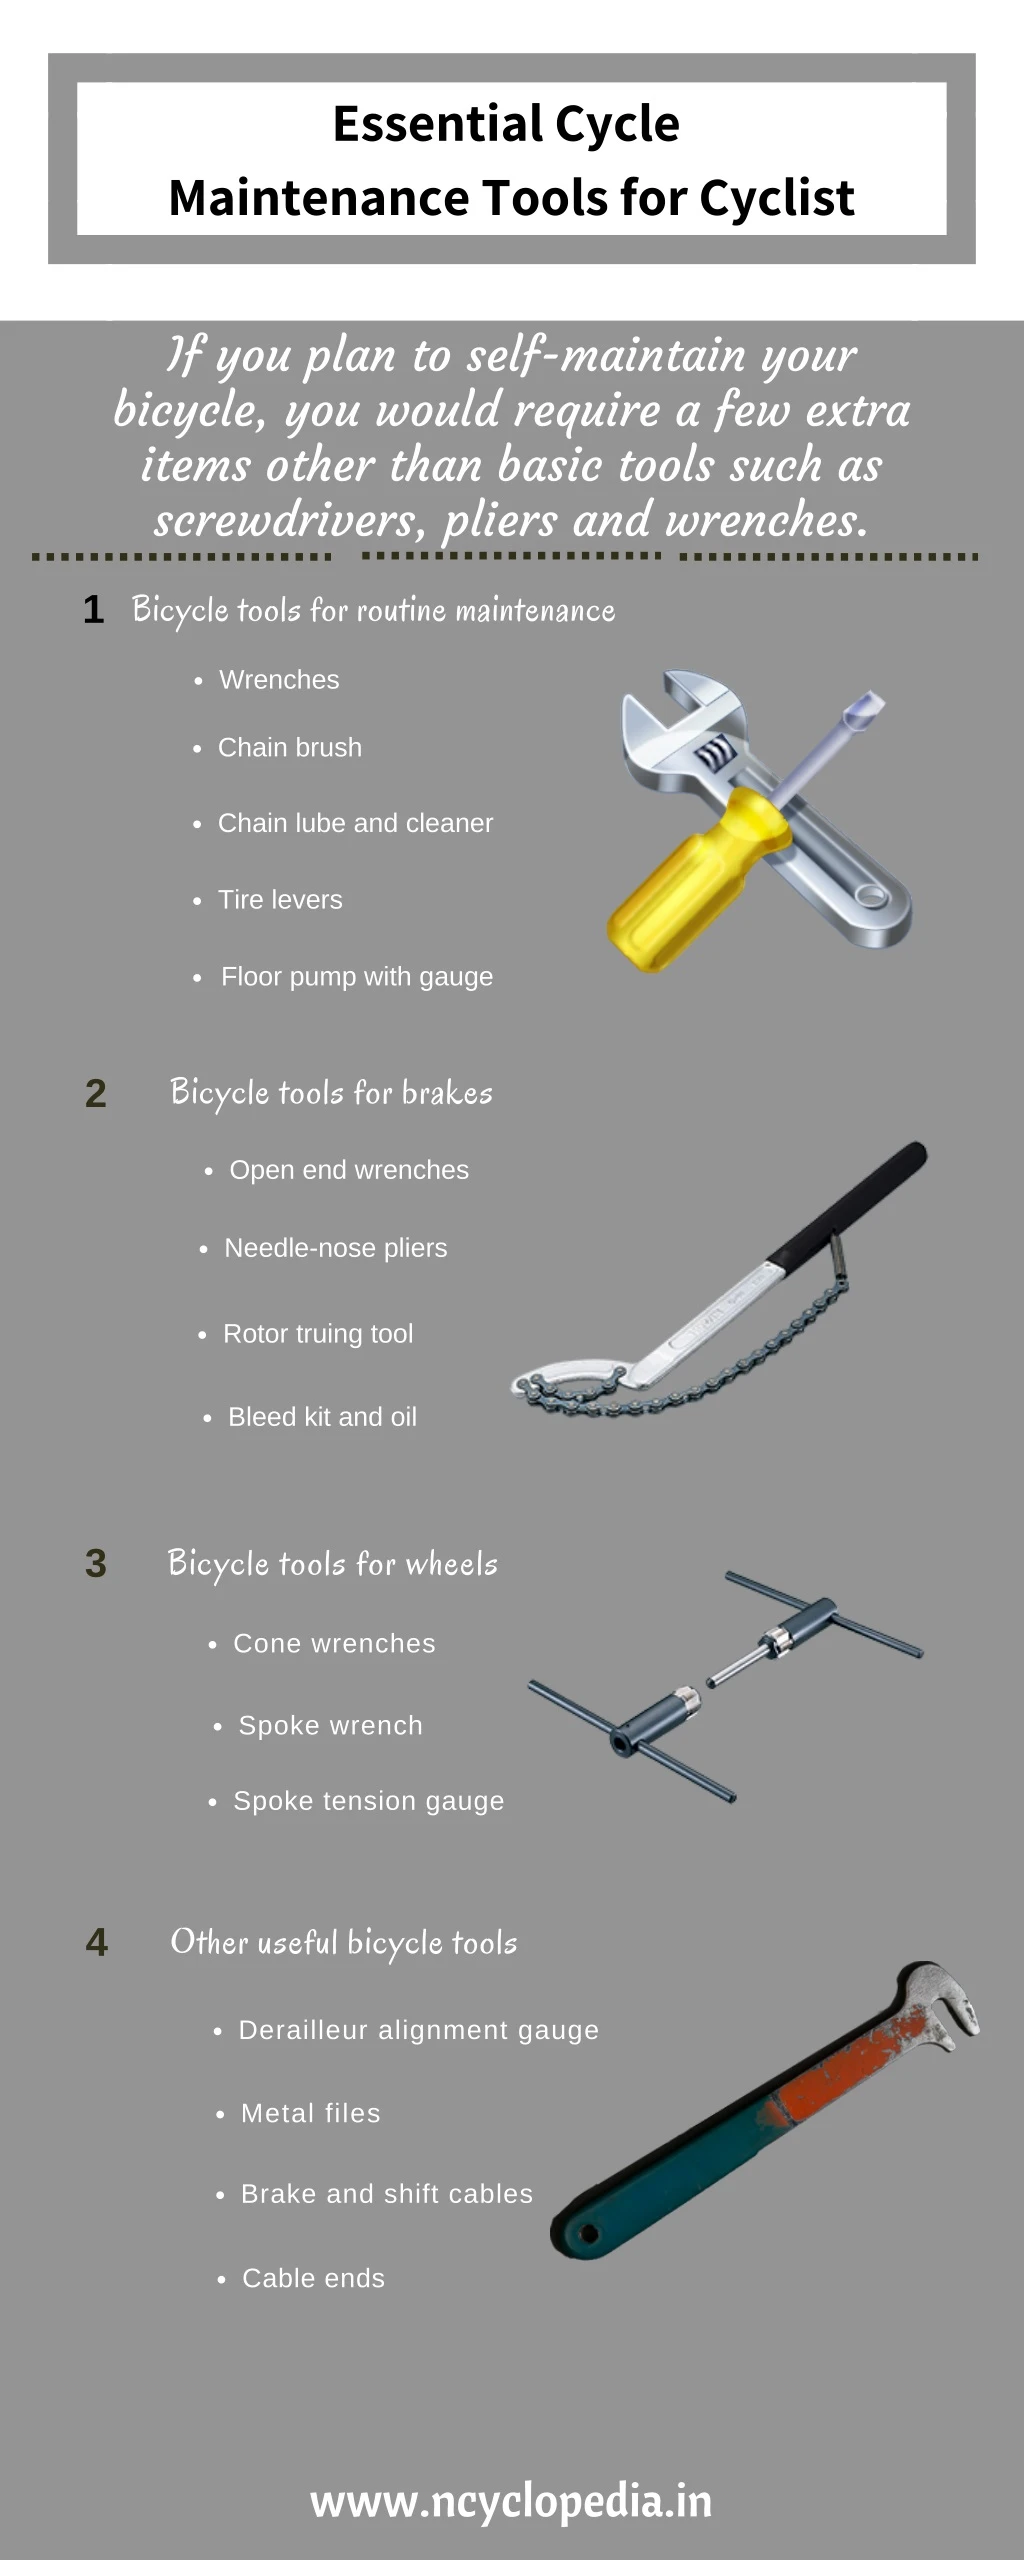 essential cycle maintenance tools for cyclist